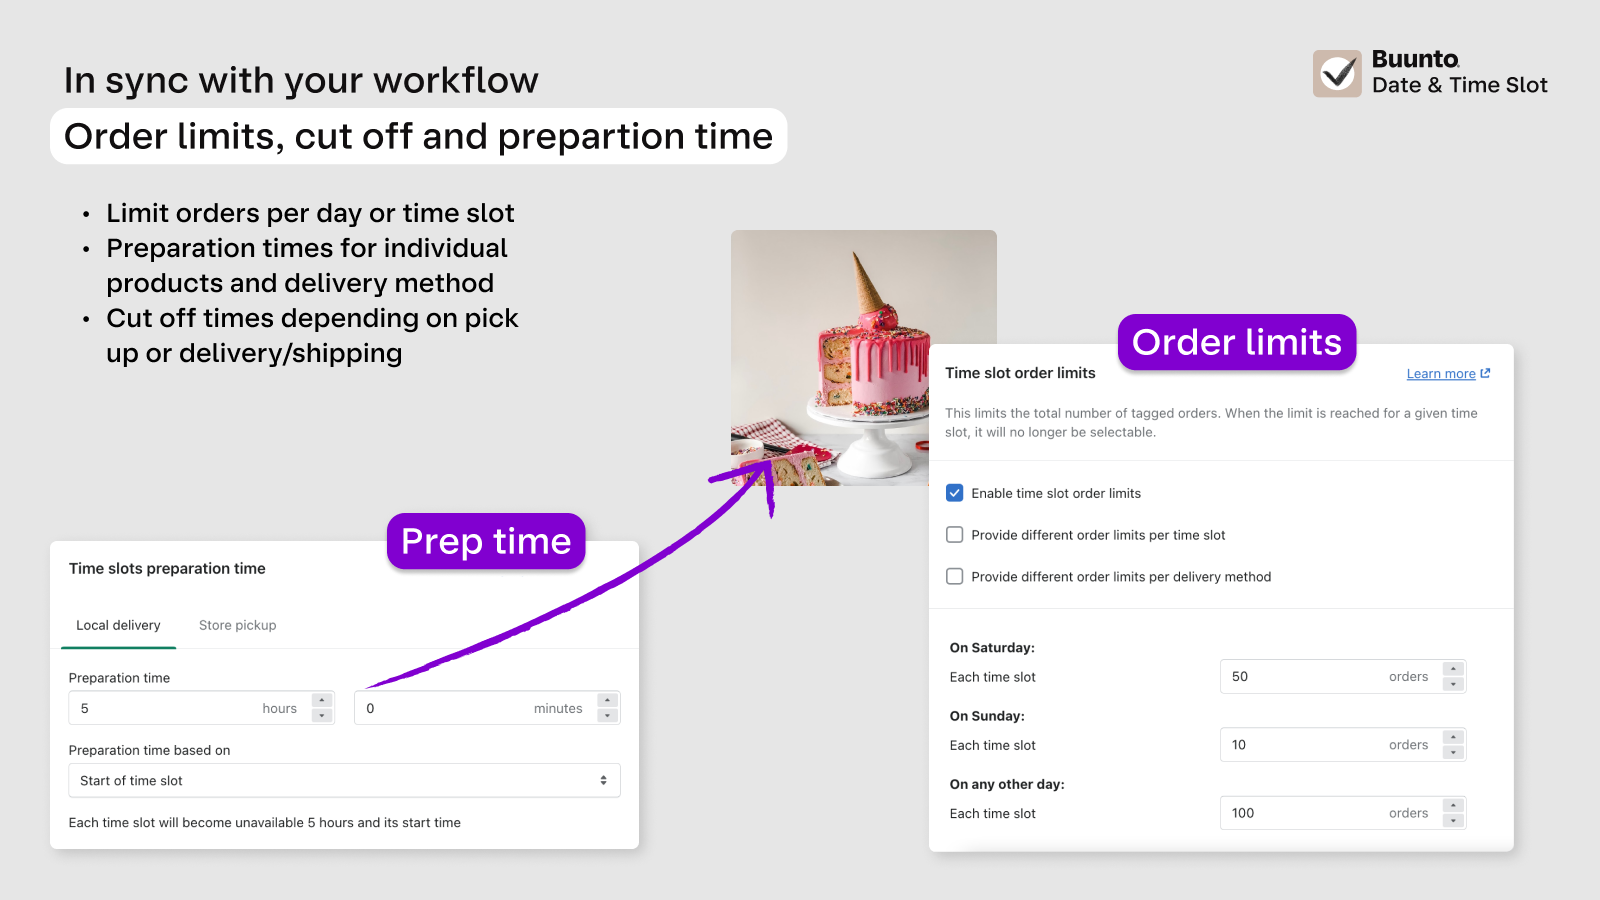 Set order limits, preparation and cut off times